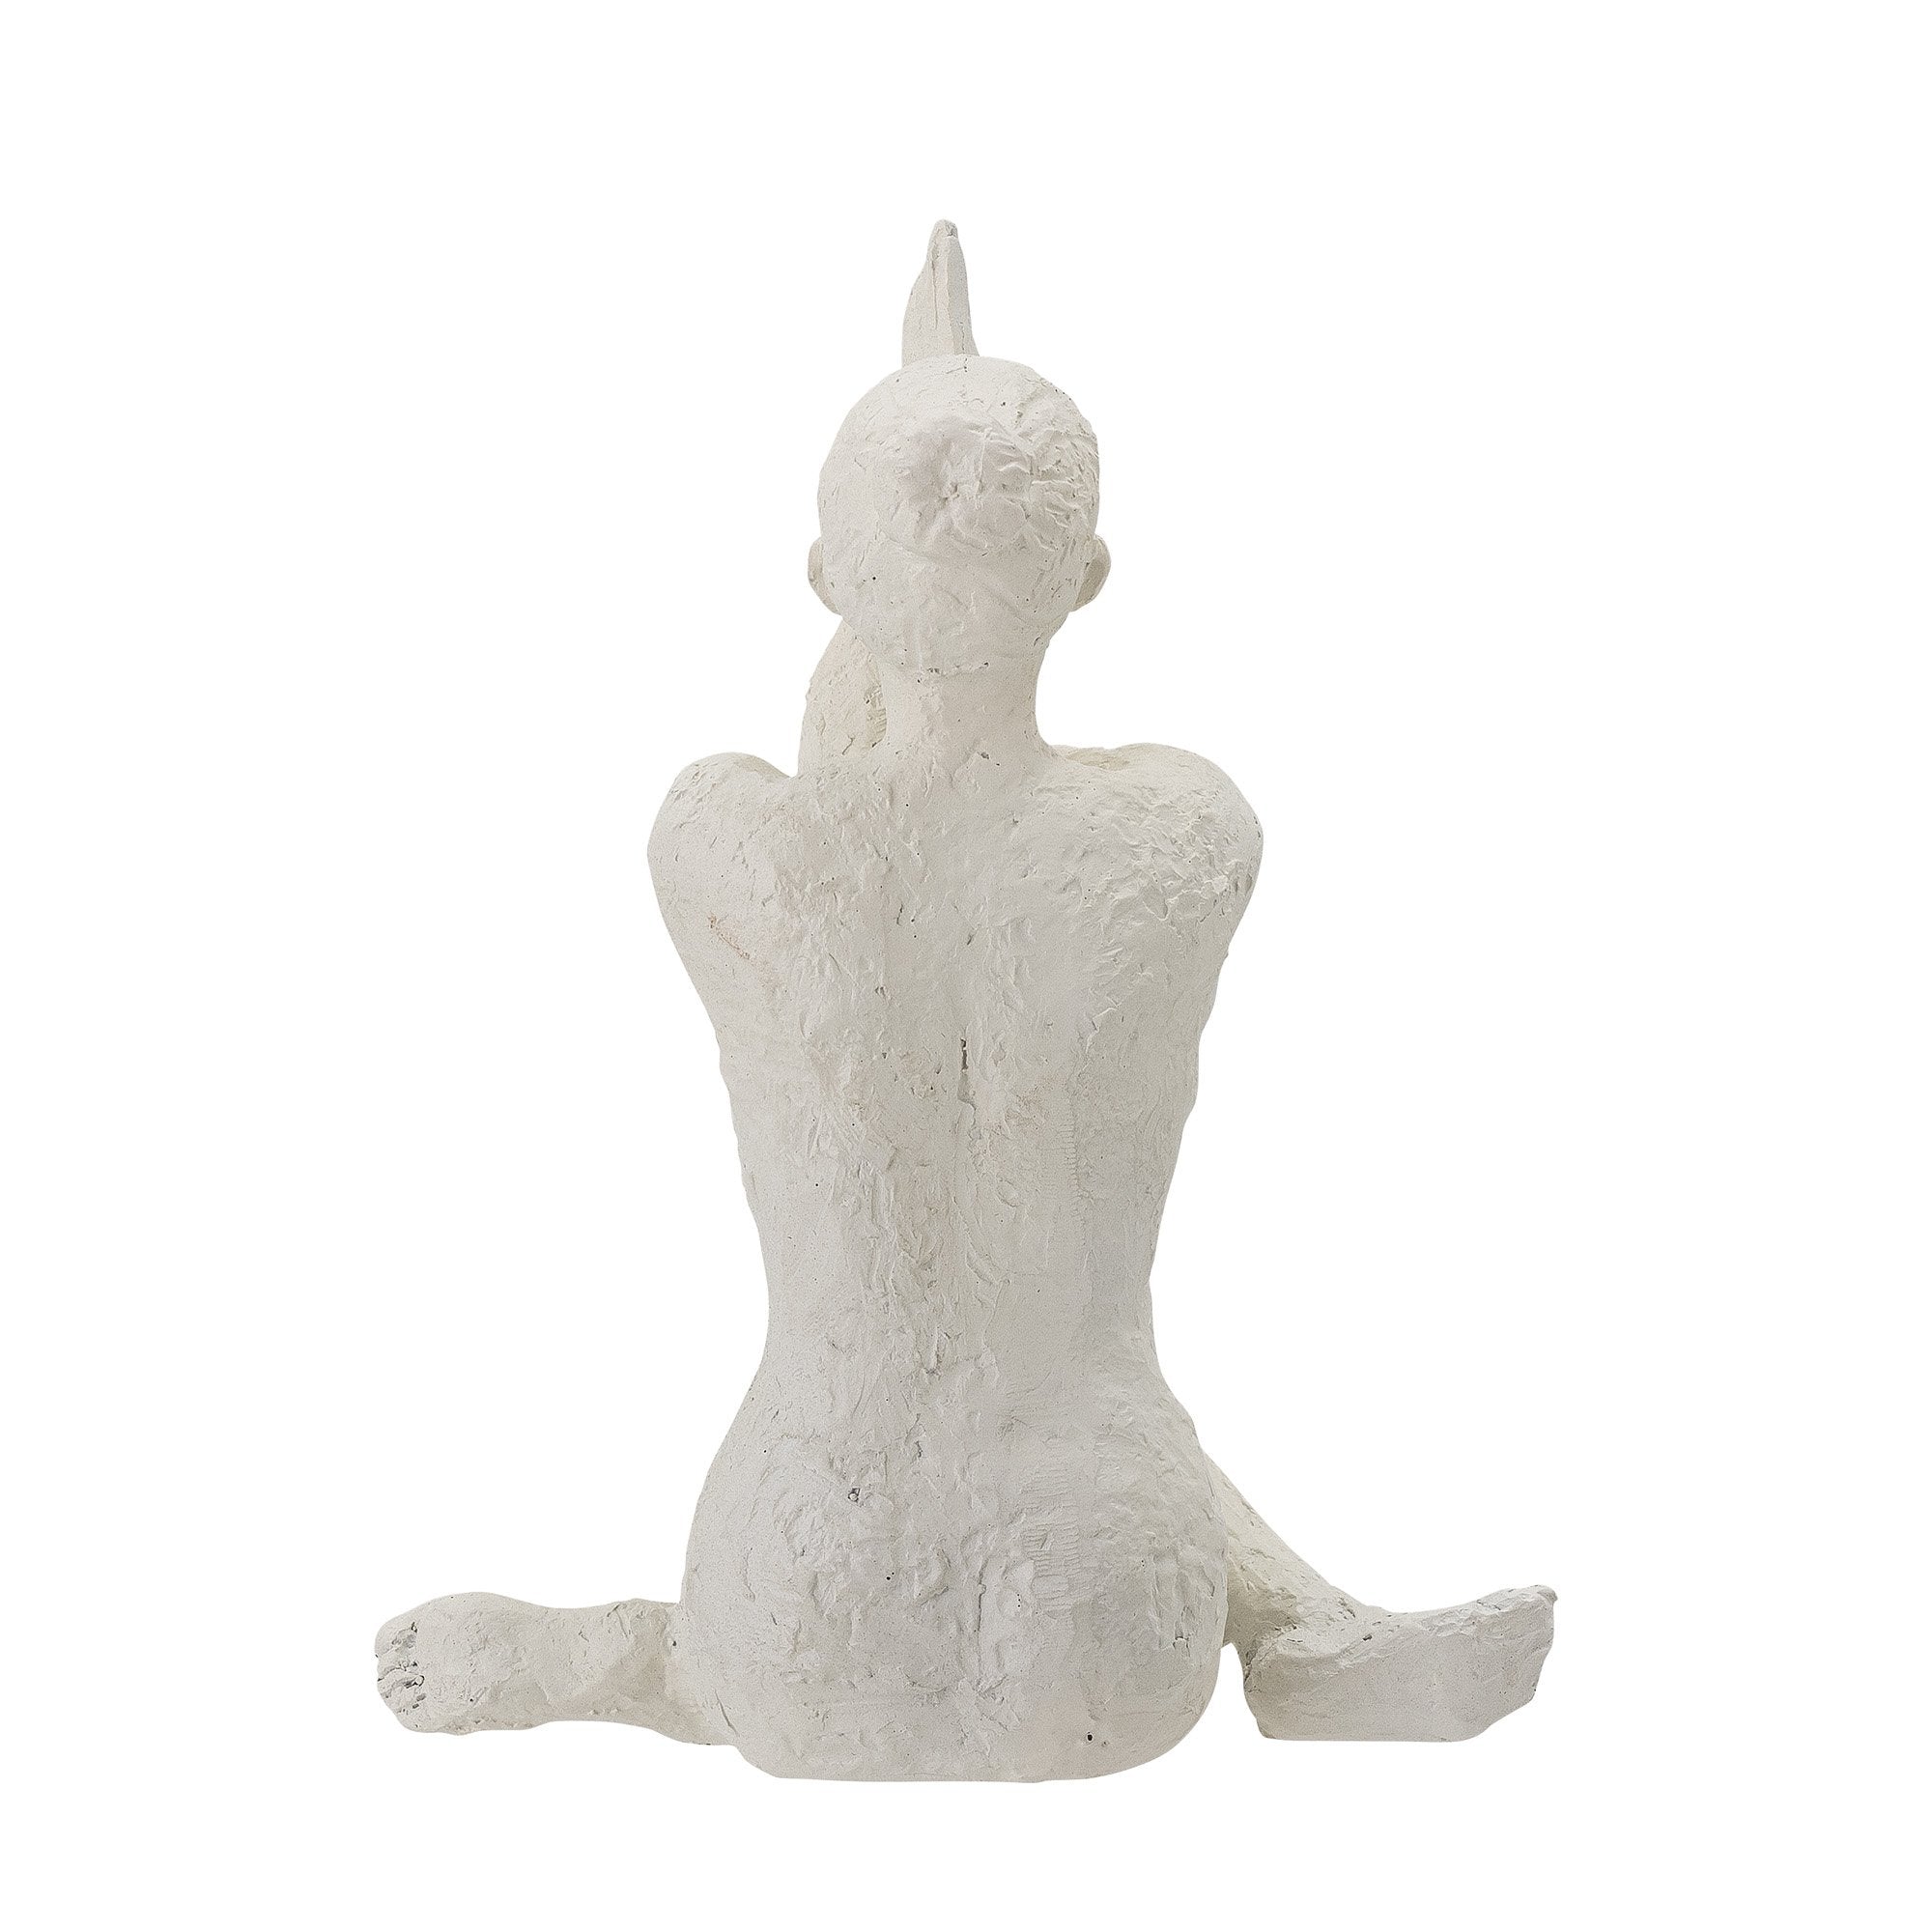 Adalina is a beautiful, white sculpture from the polyżywica, depicting yogi. In full concentration, with arms folded, he devotes himself to the peaceful meditation. This is a unique decoration with a heterogeneous texture that will help create a home and cozy atmosphere in your interior. It can be easily combined with other decorations to diversify the arrangement.